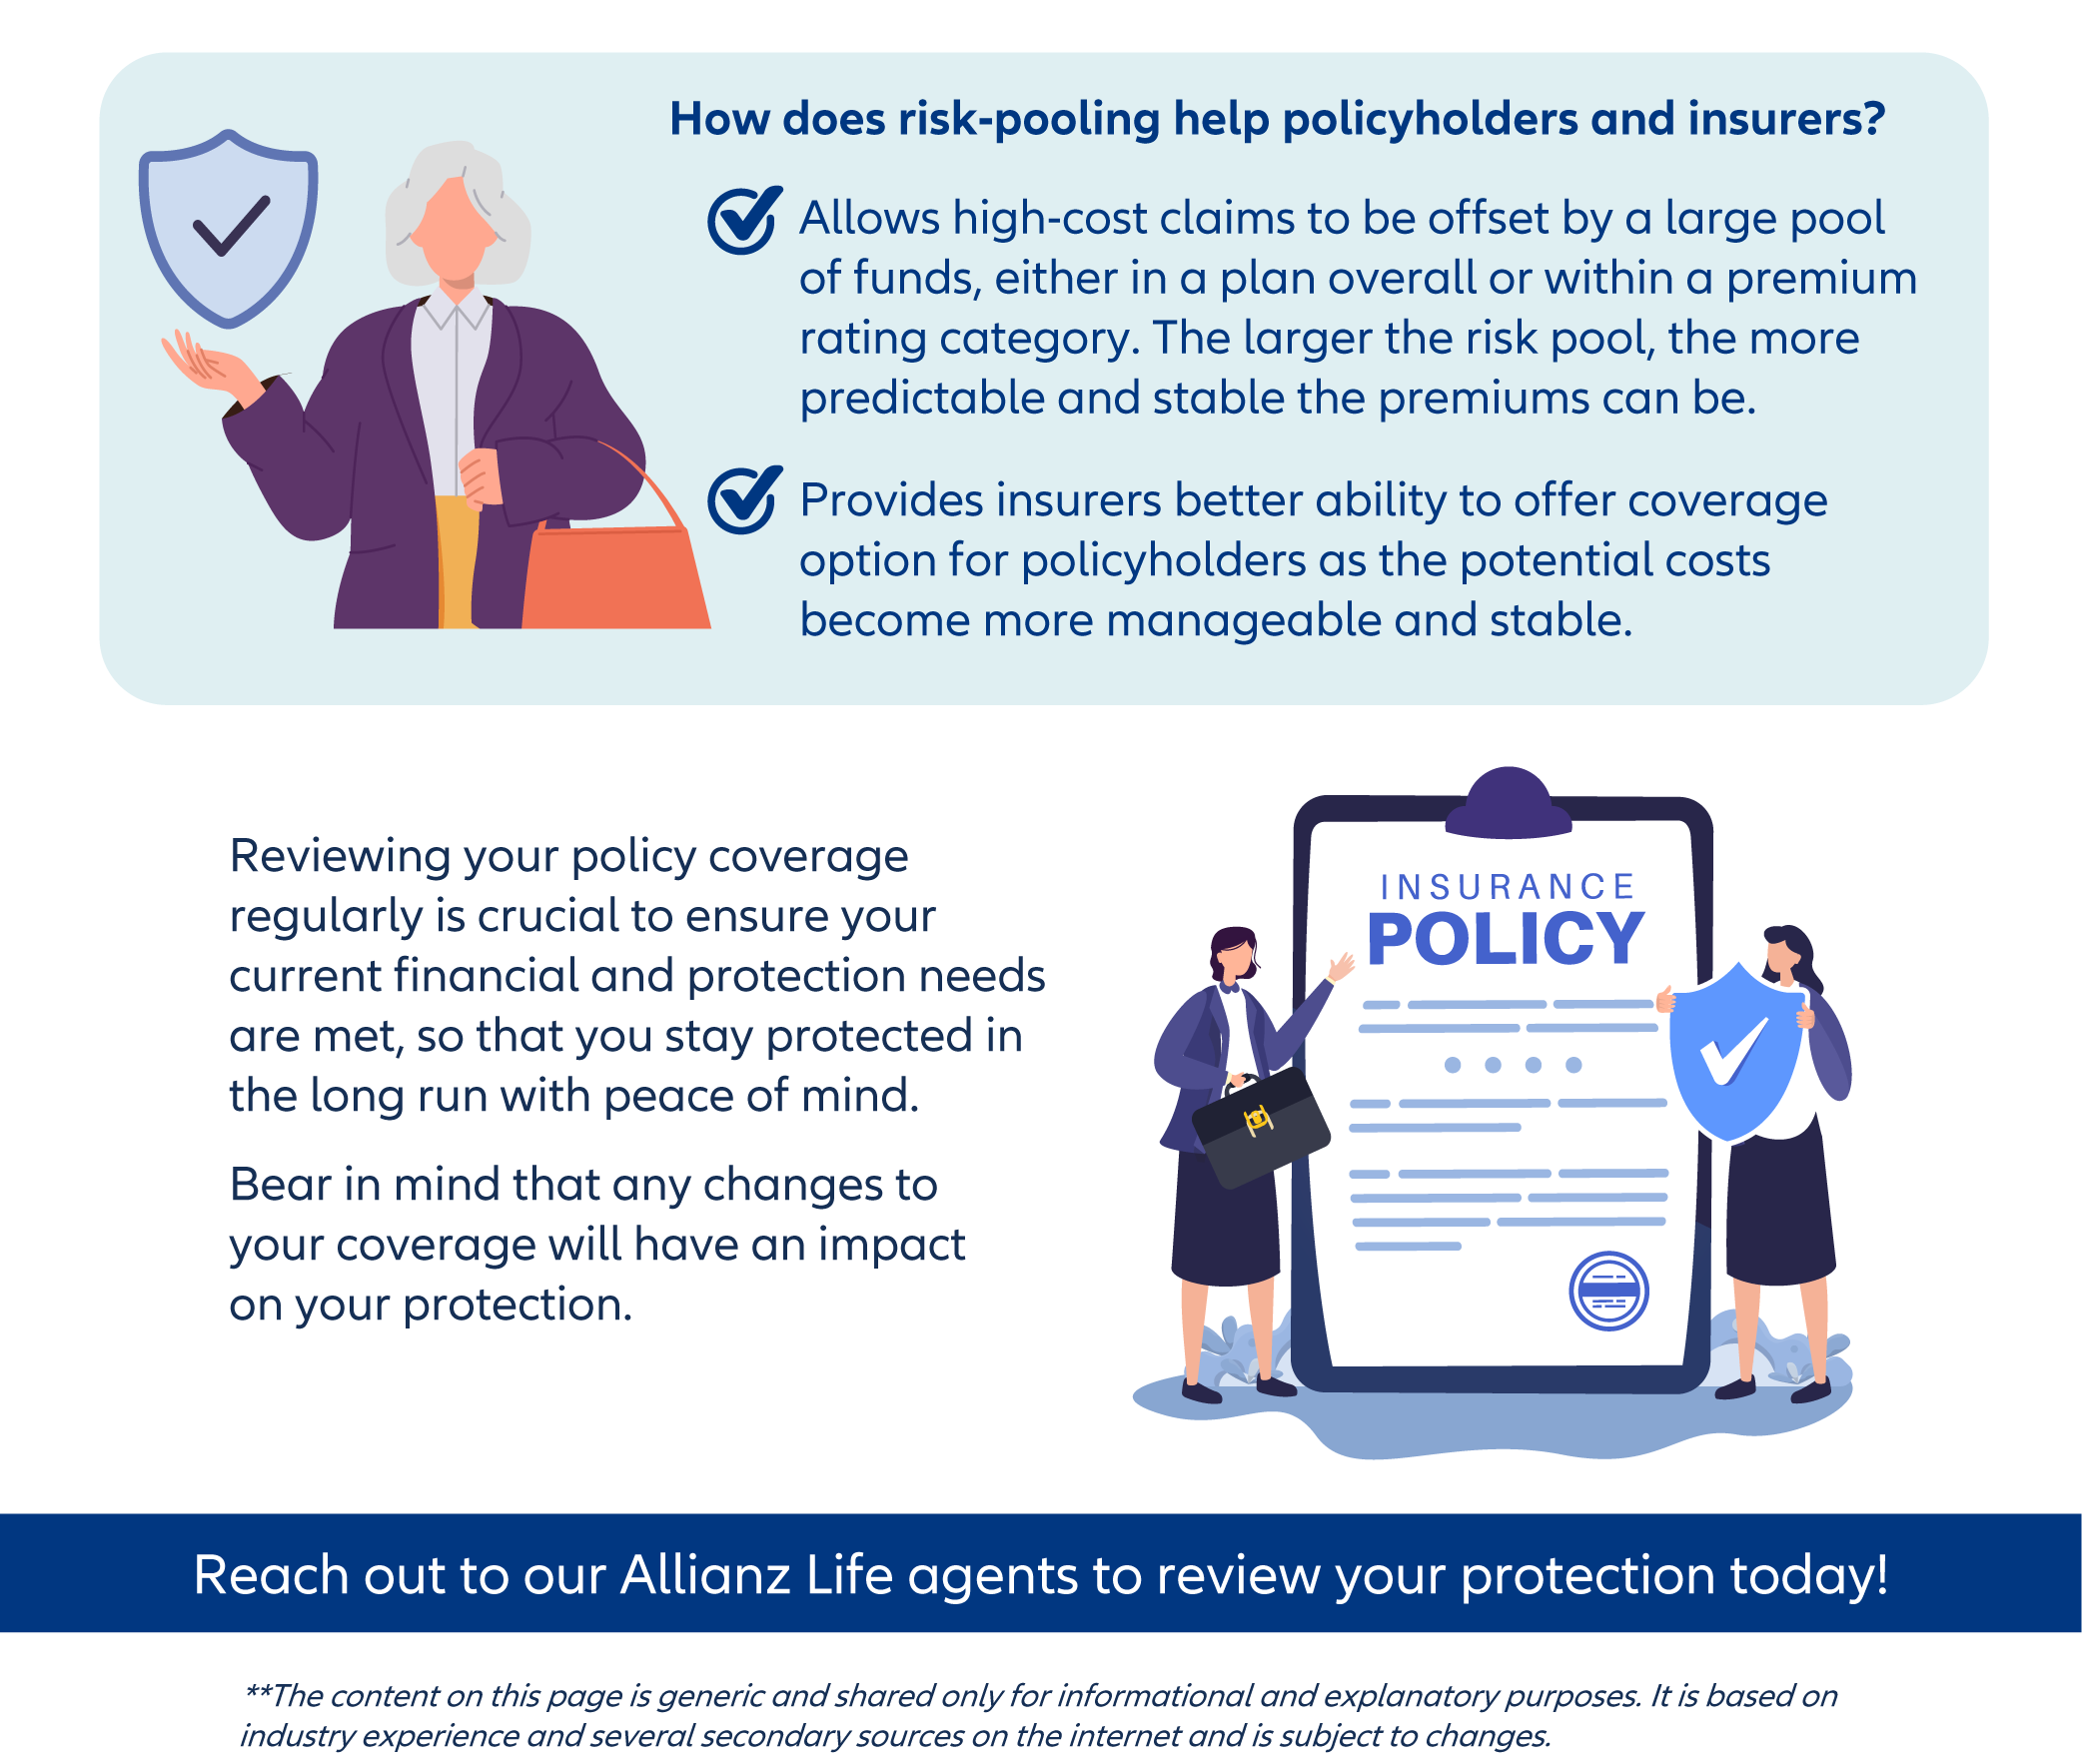 How does risk-pooling help policyholders and insurers?